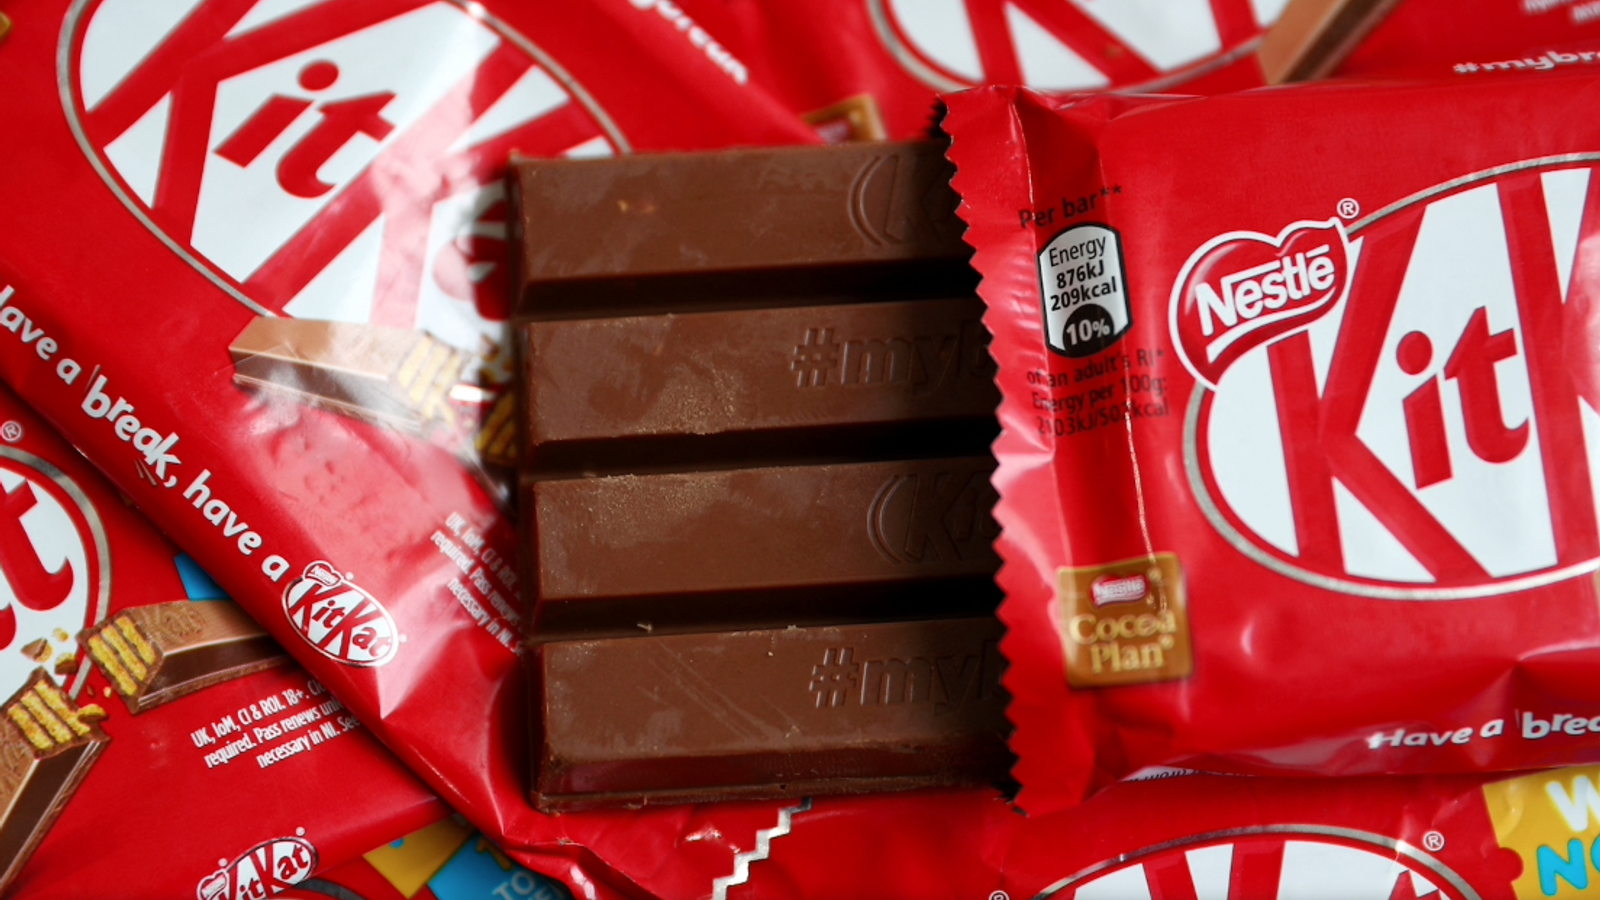 KitKat  Official Profile